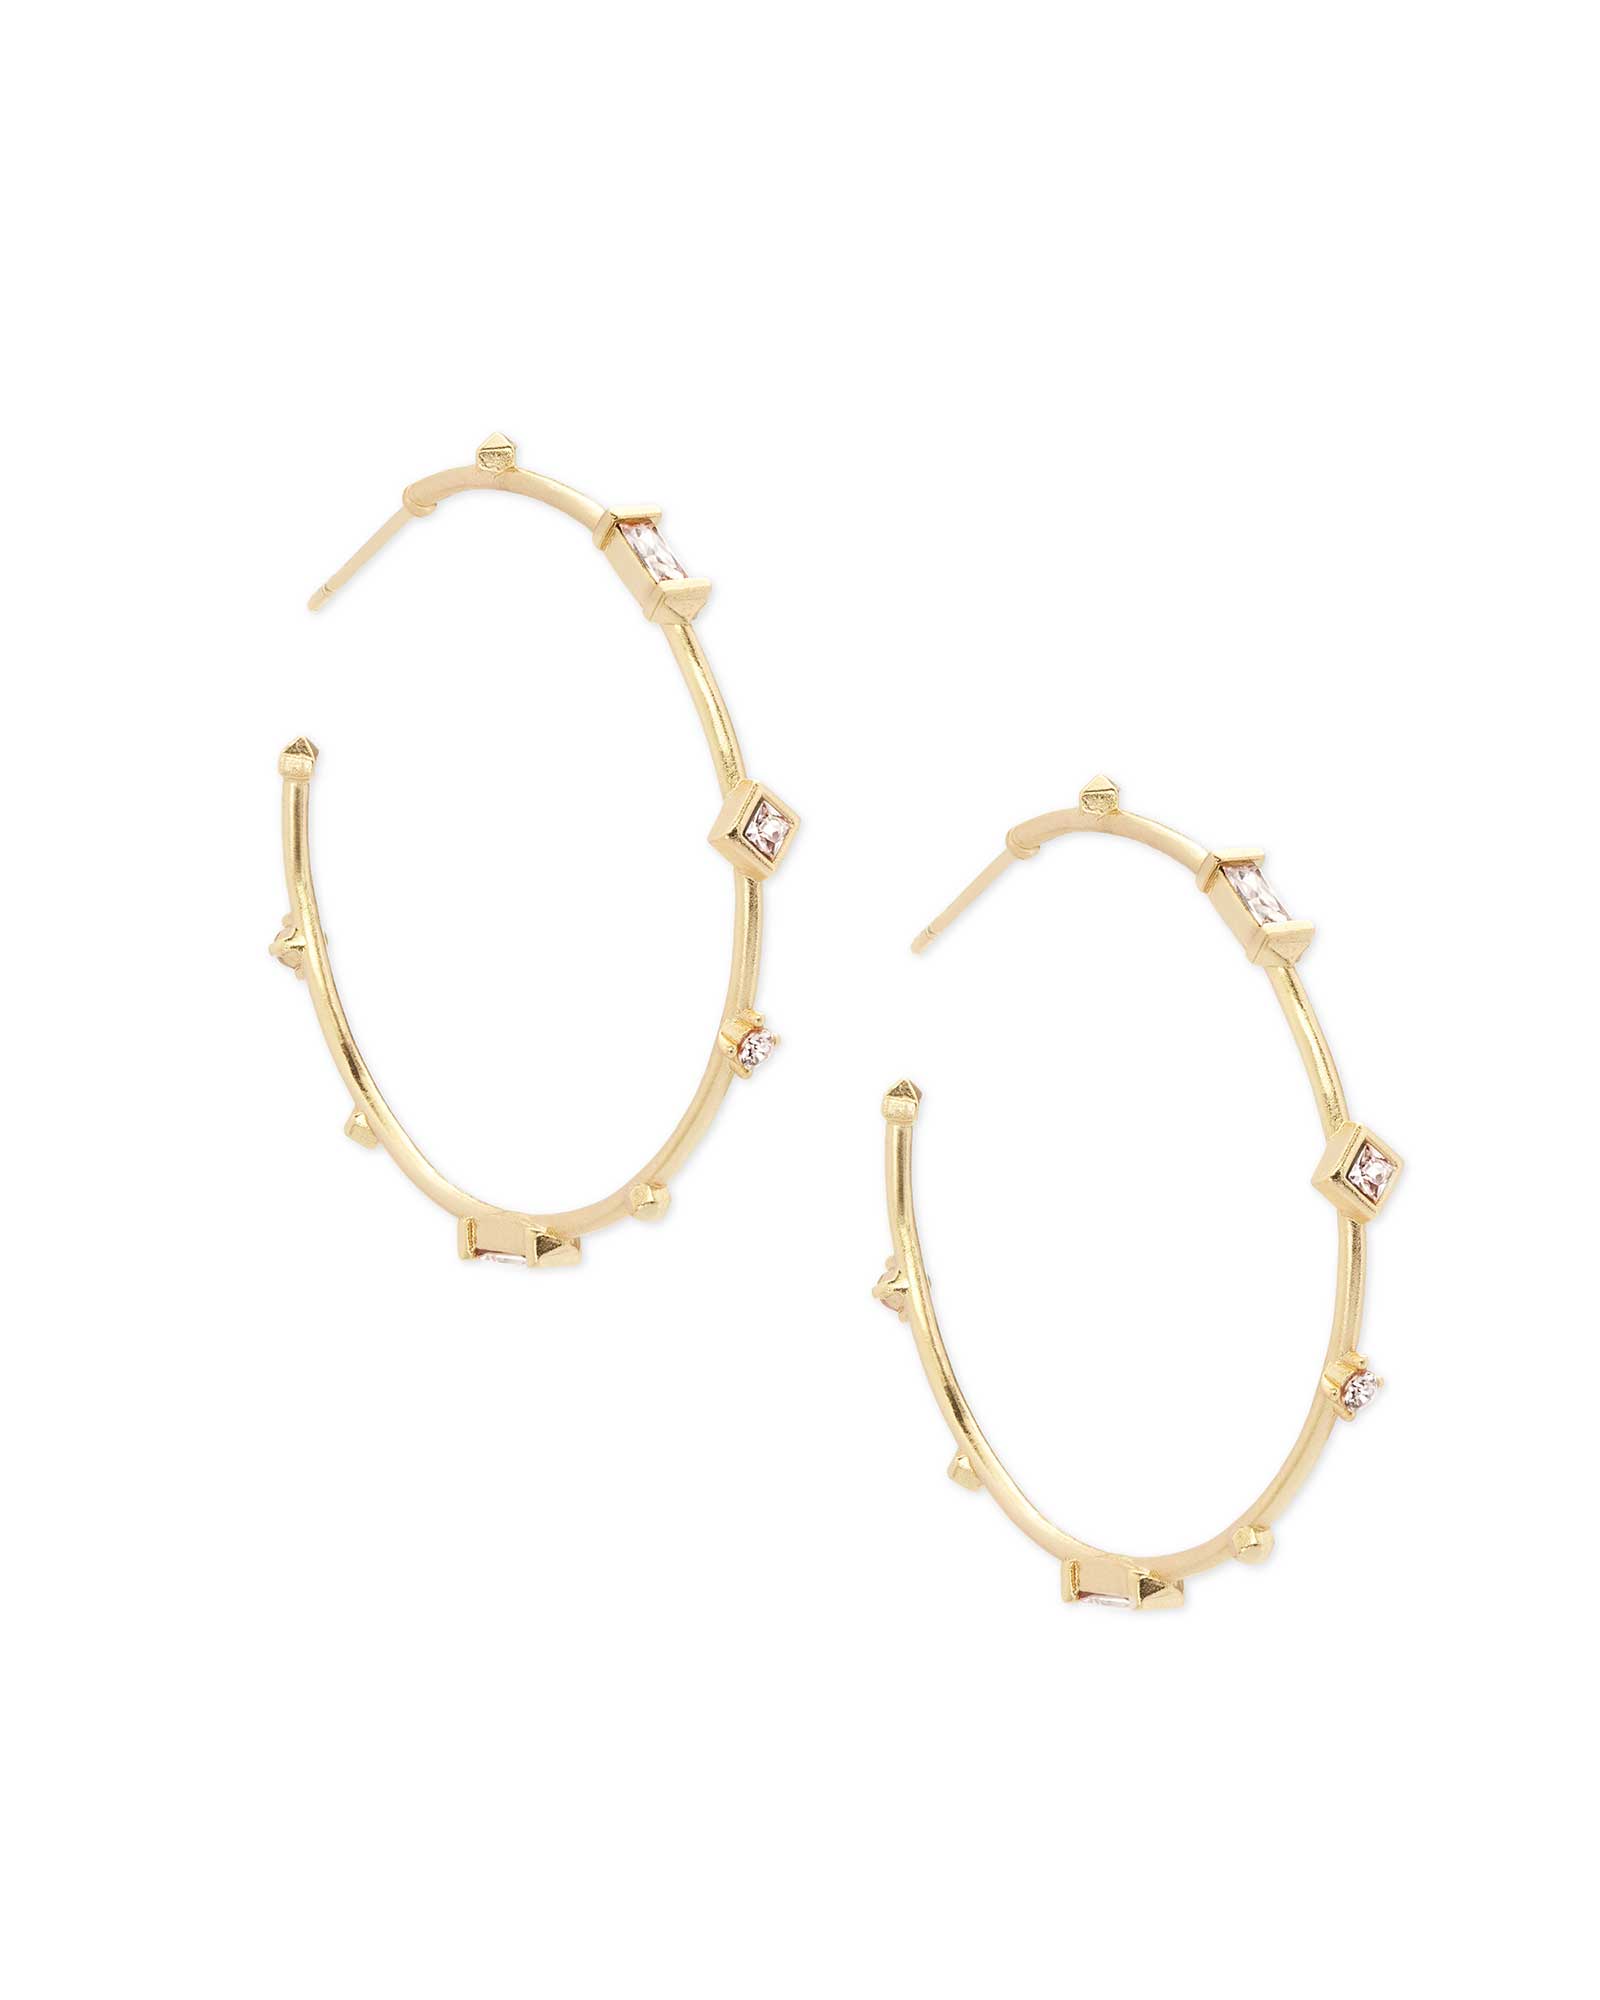 Small White Hoop Earrings With Sparkling Gold-Tone Faceted Crystal Accents